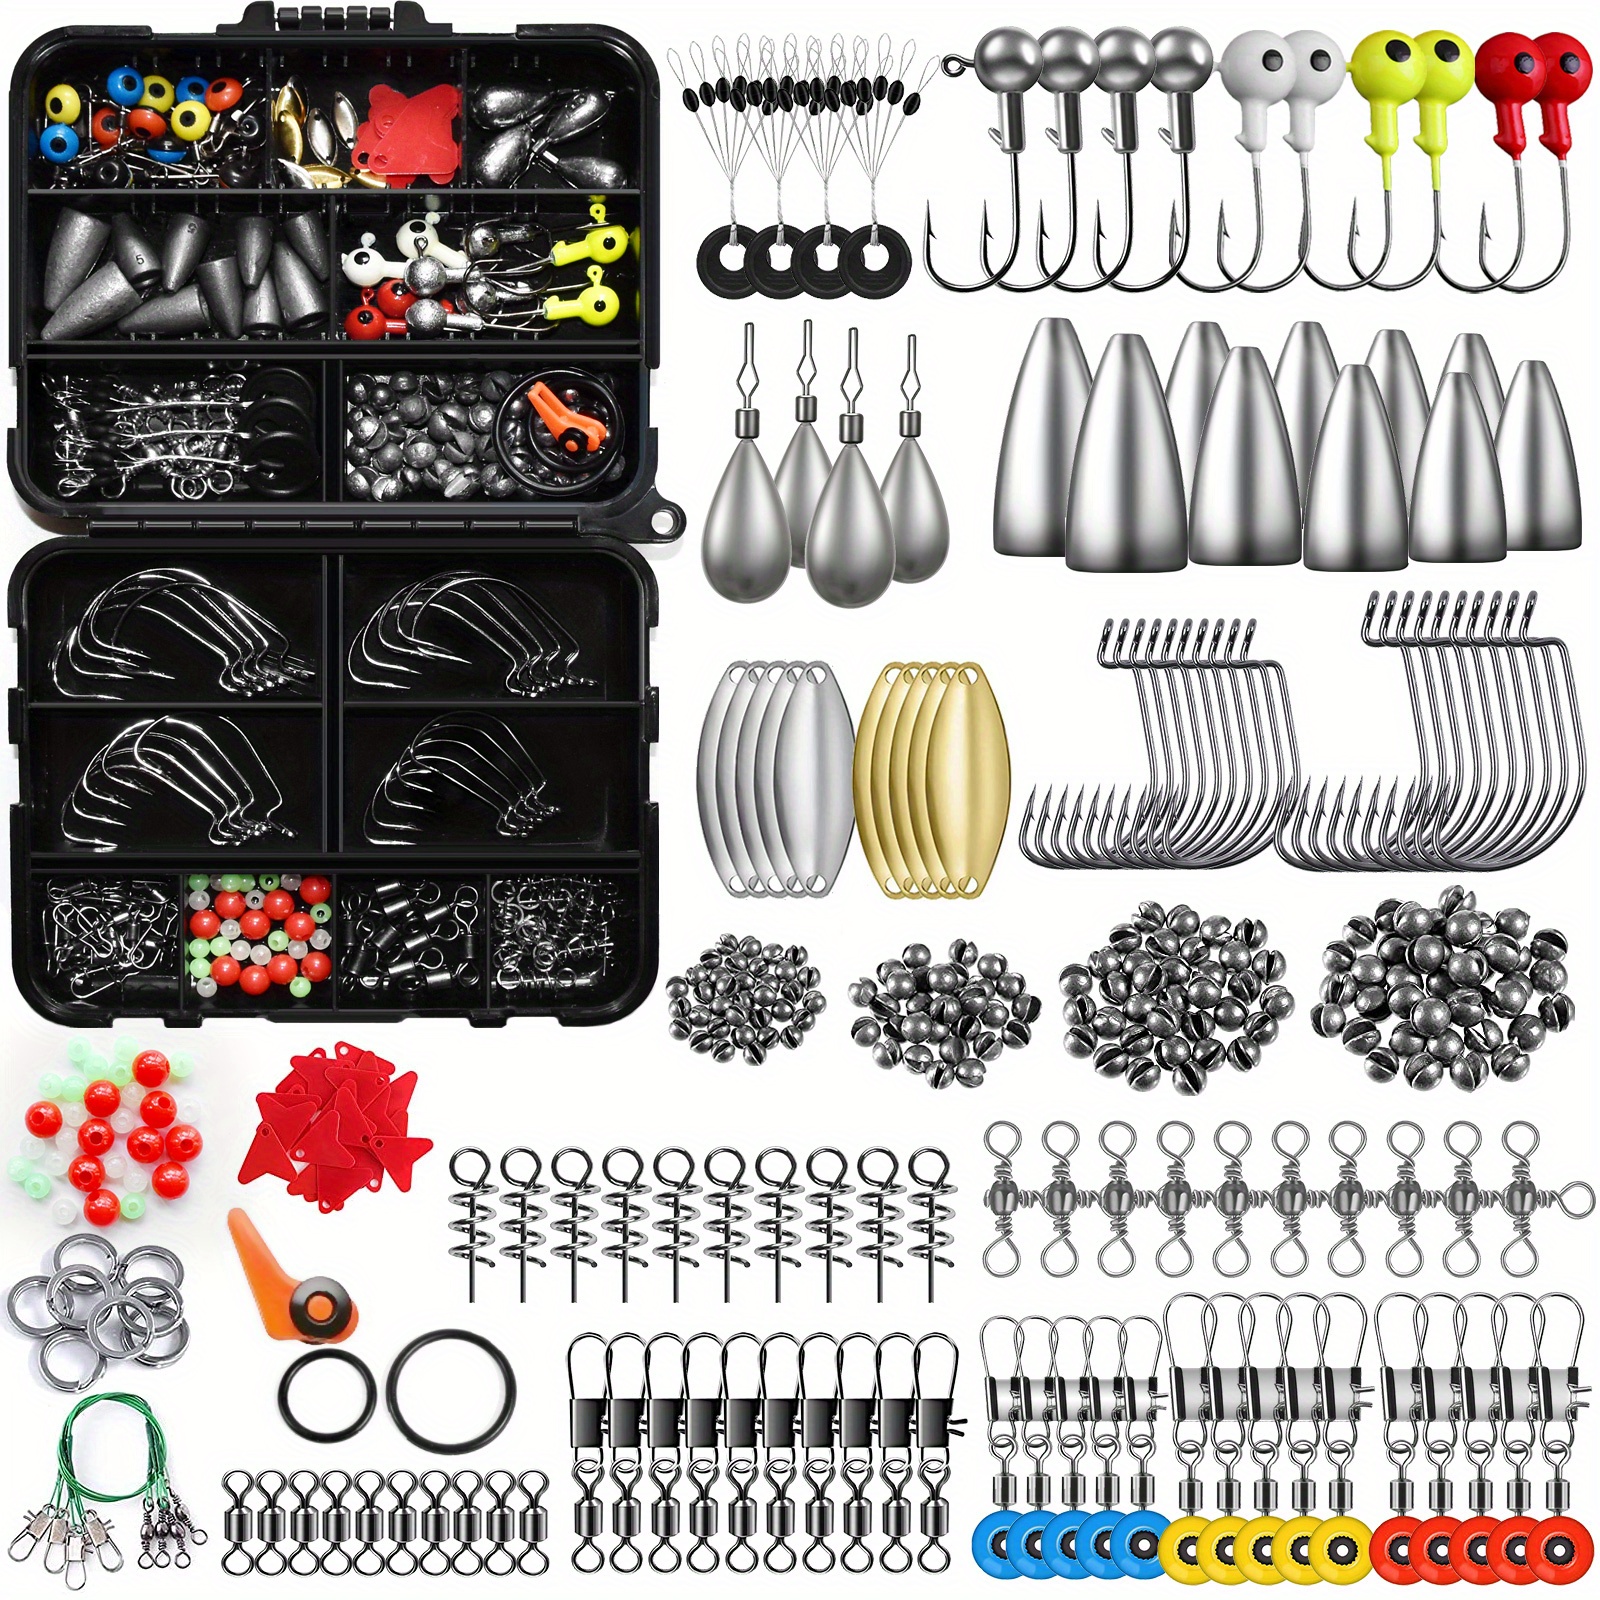 208pcs/268pcs Complete Fishing Tackle Set With Hooks, Weights, Spinner  Blade, And Lures - Perfect For Bass, Bluegill, And Crappie - Includes  Convenien